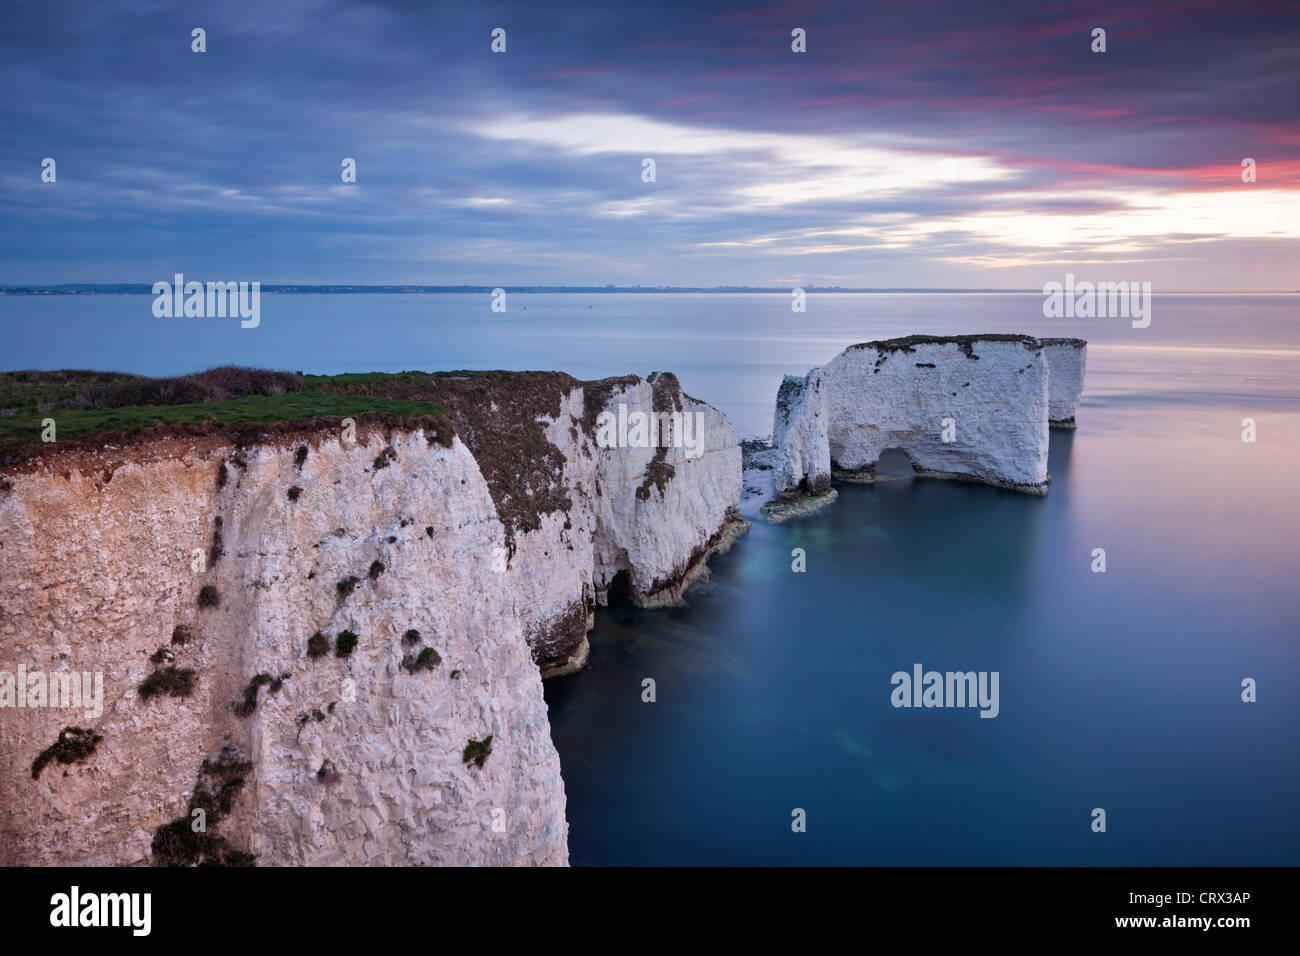 Old Harry Rocks at the start of the Jurassic Coast World Heritage Site, Dorset, England. Spring (April) 2012. Stock Photo